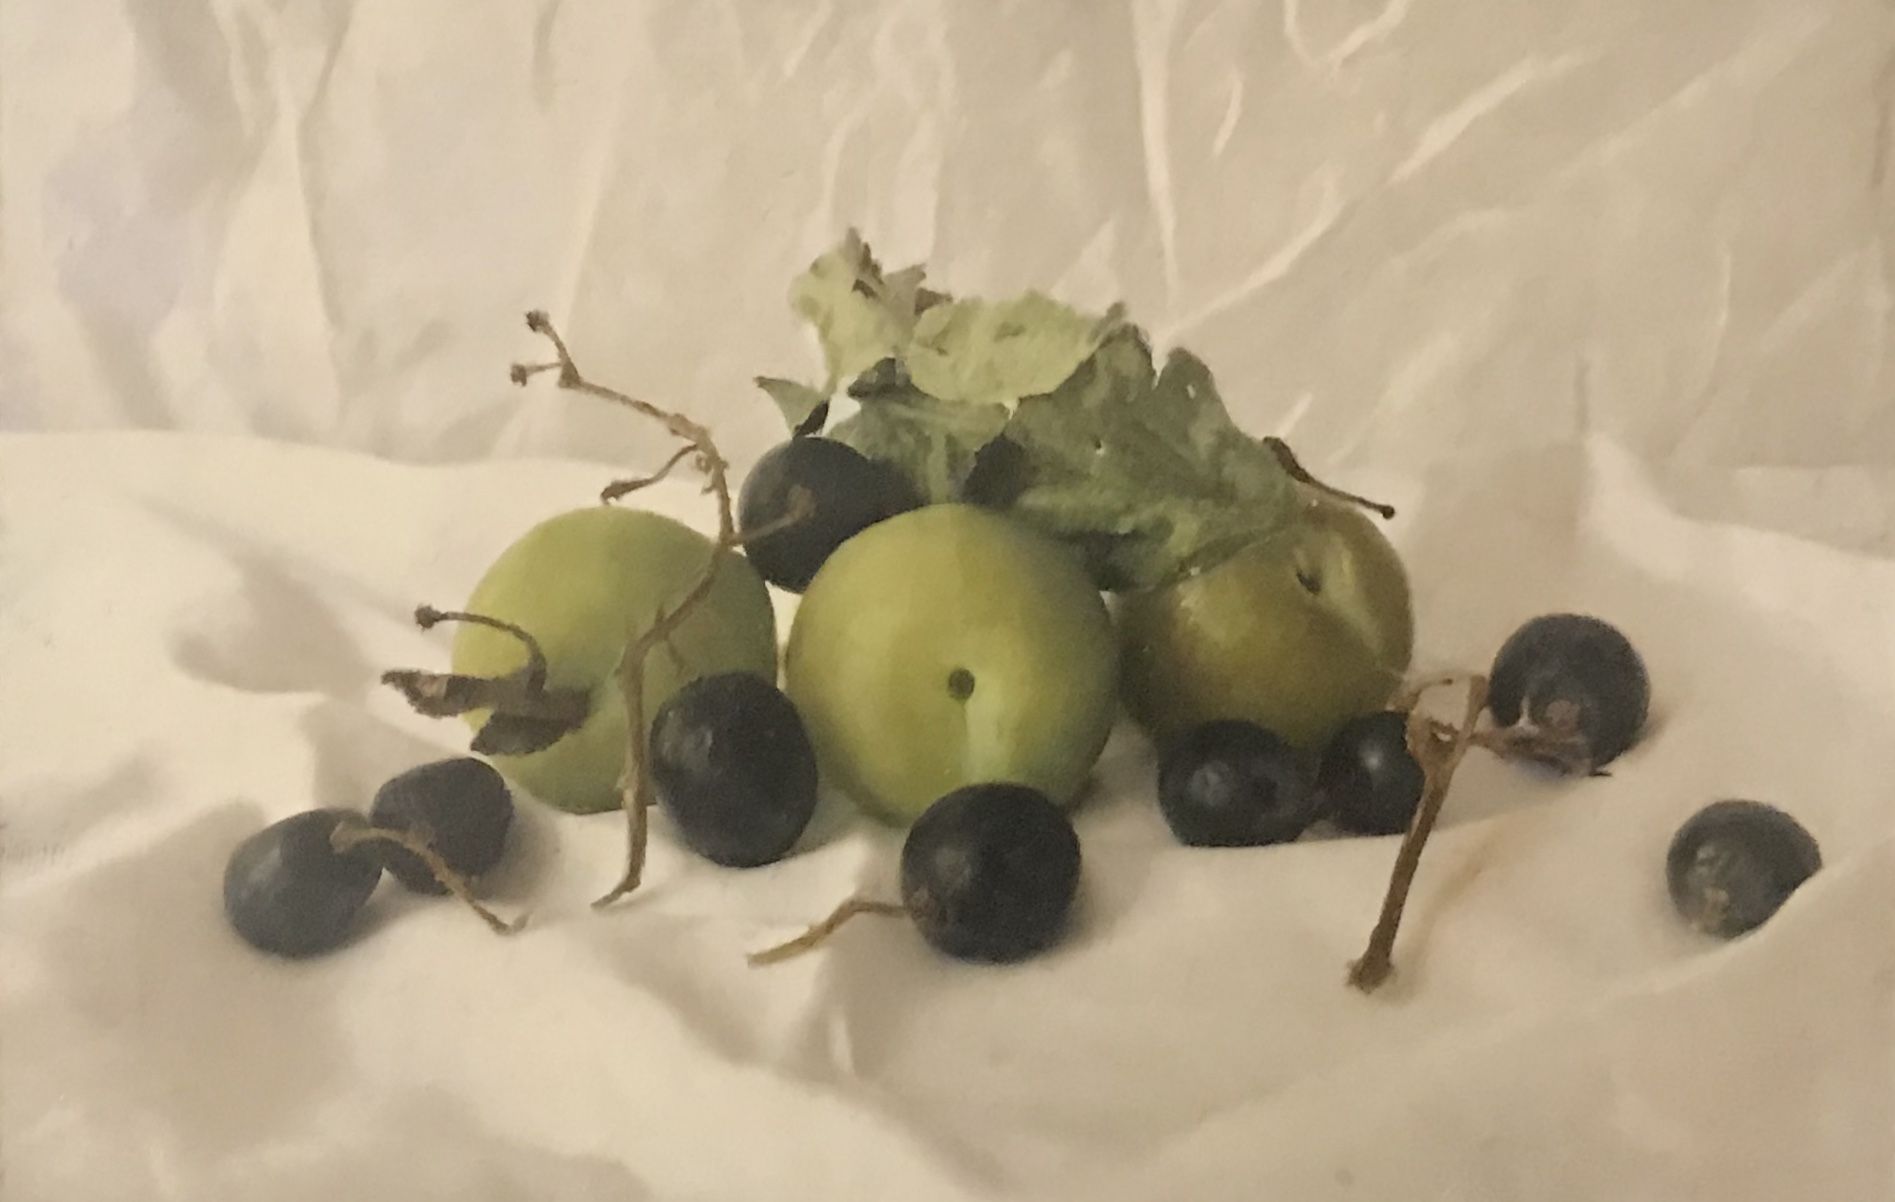 Greengage and Black Grapes by Kate Verrion